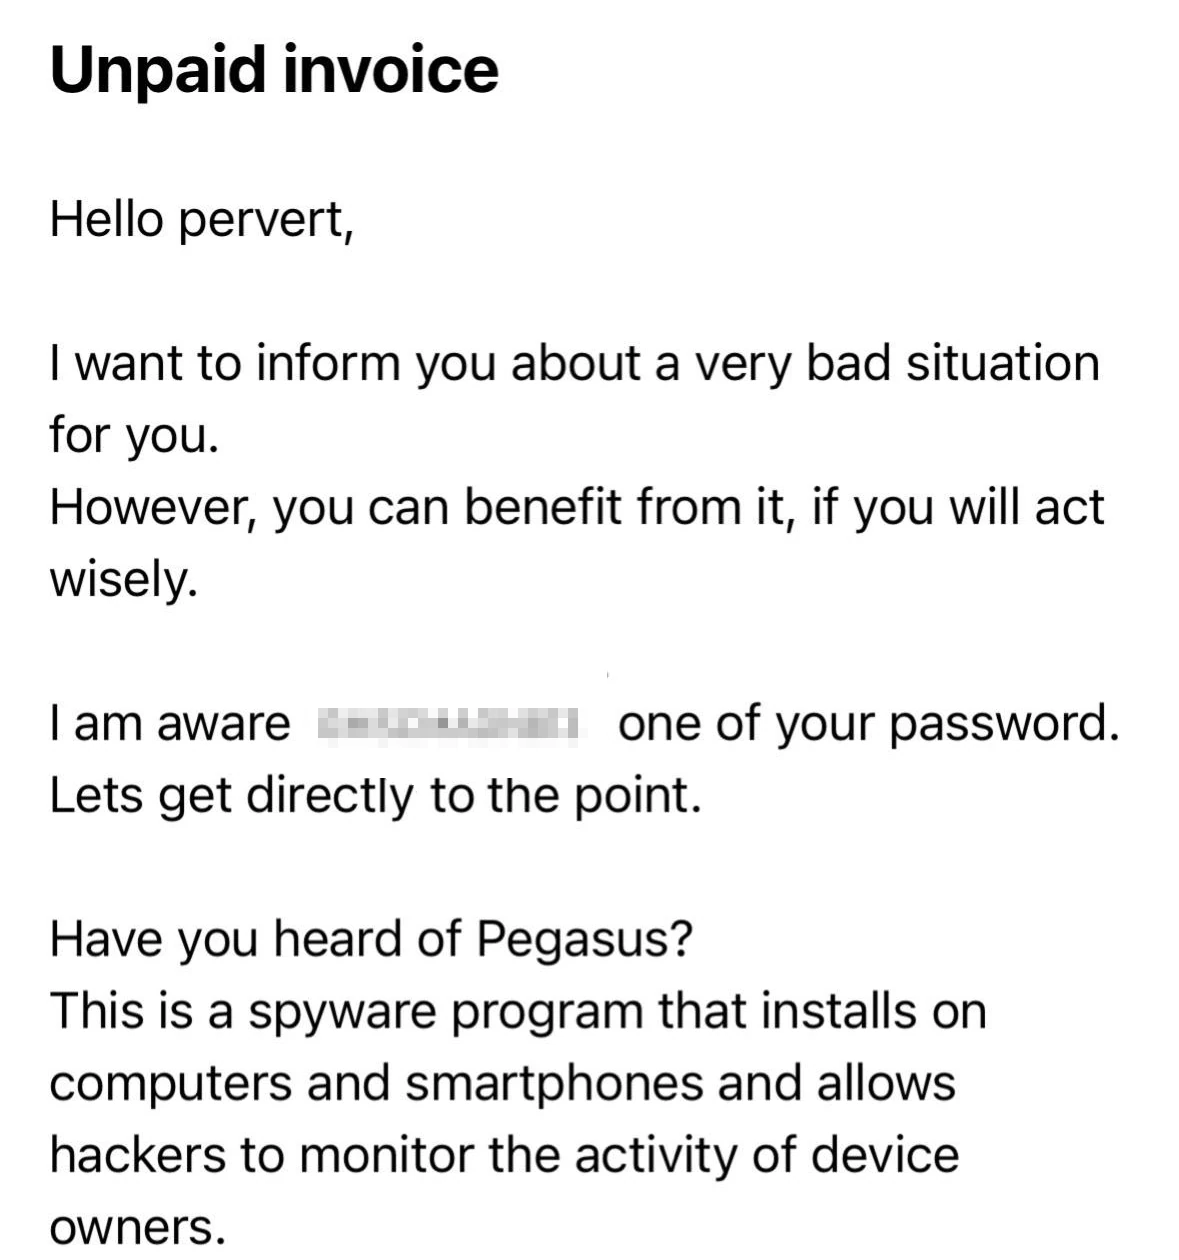 Have you heard about Pegasus? email scam with password